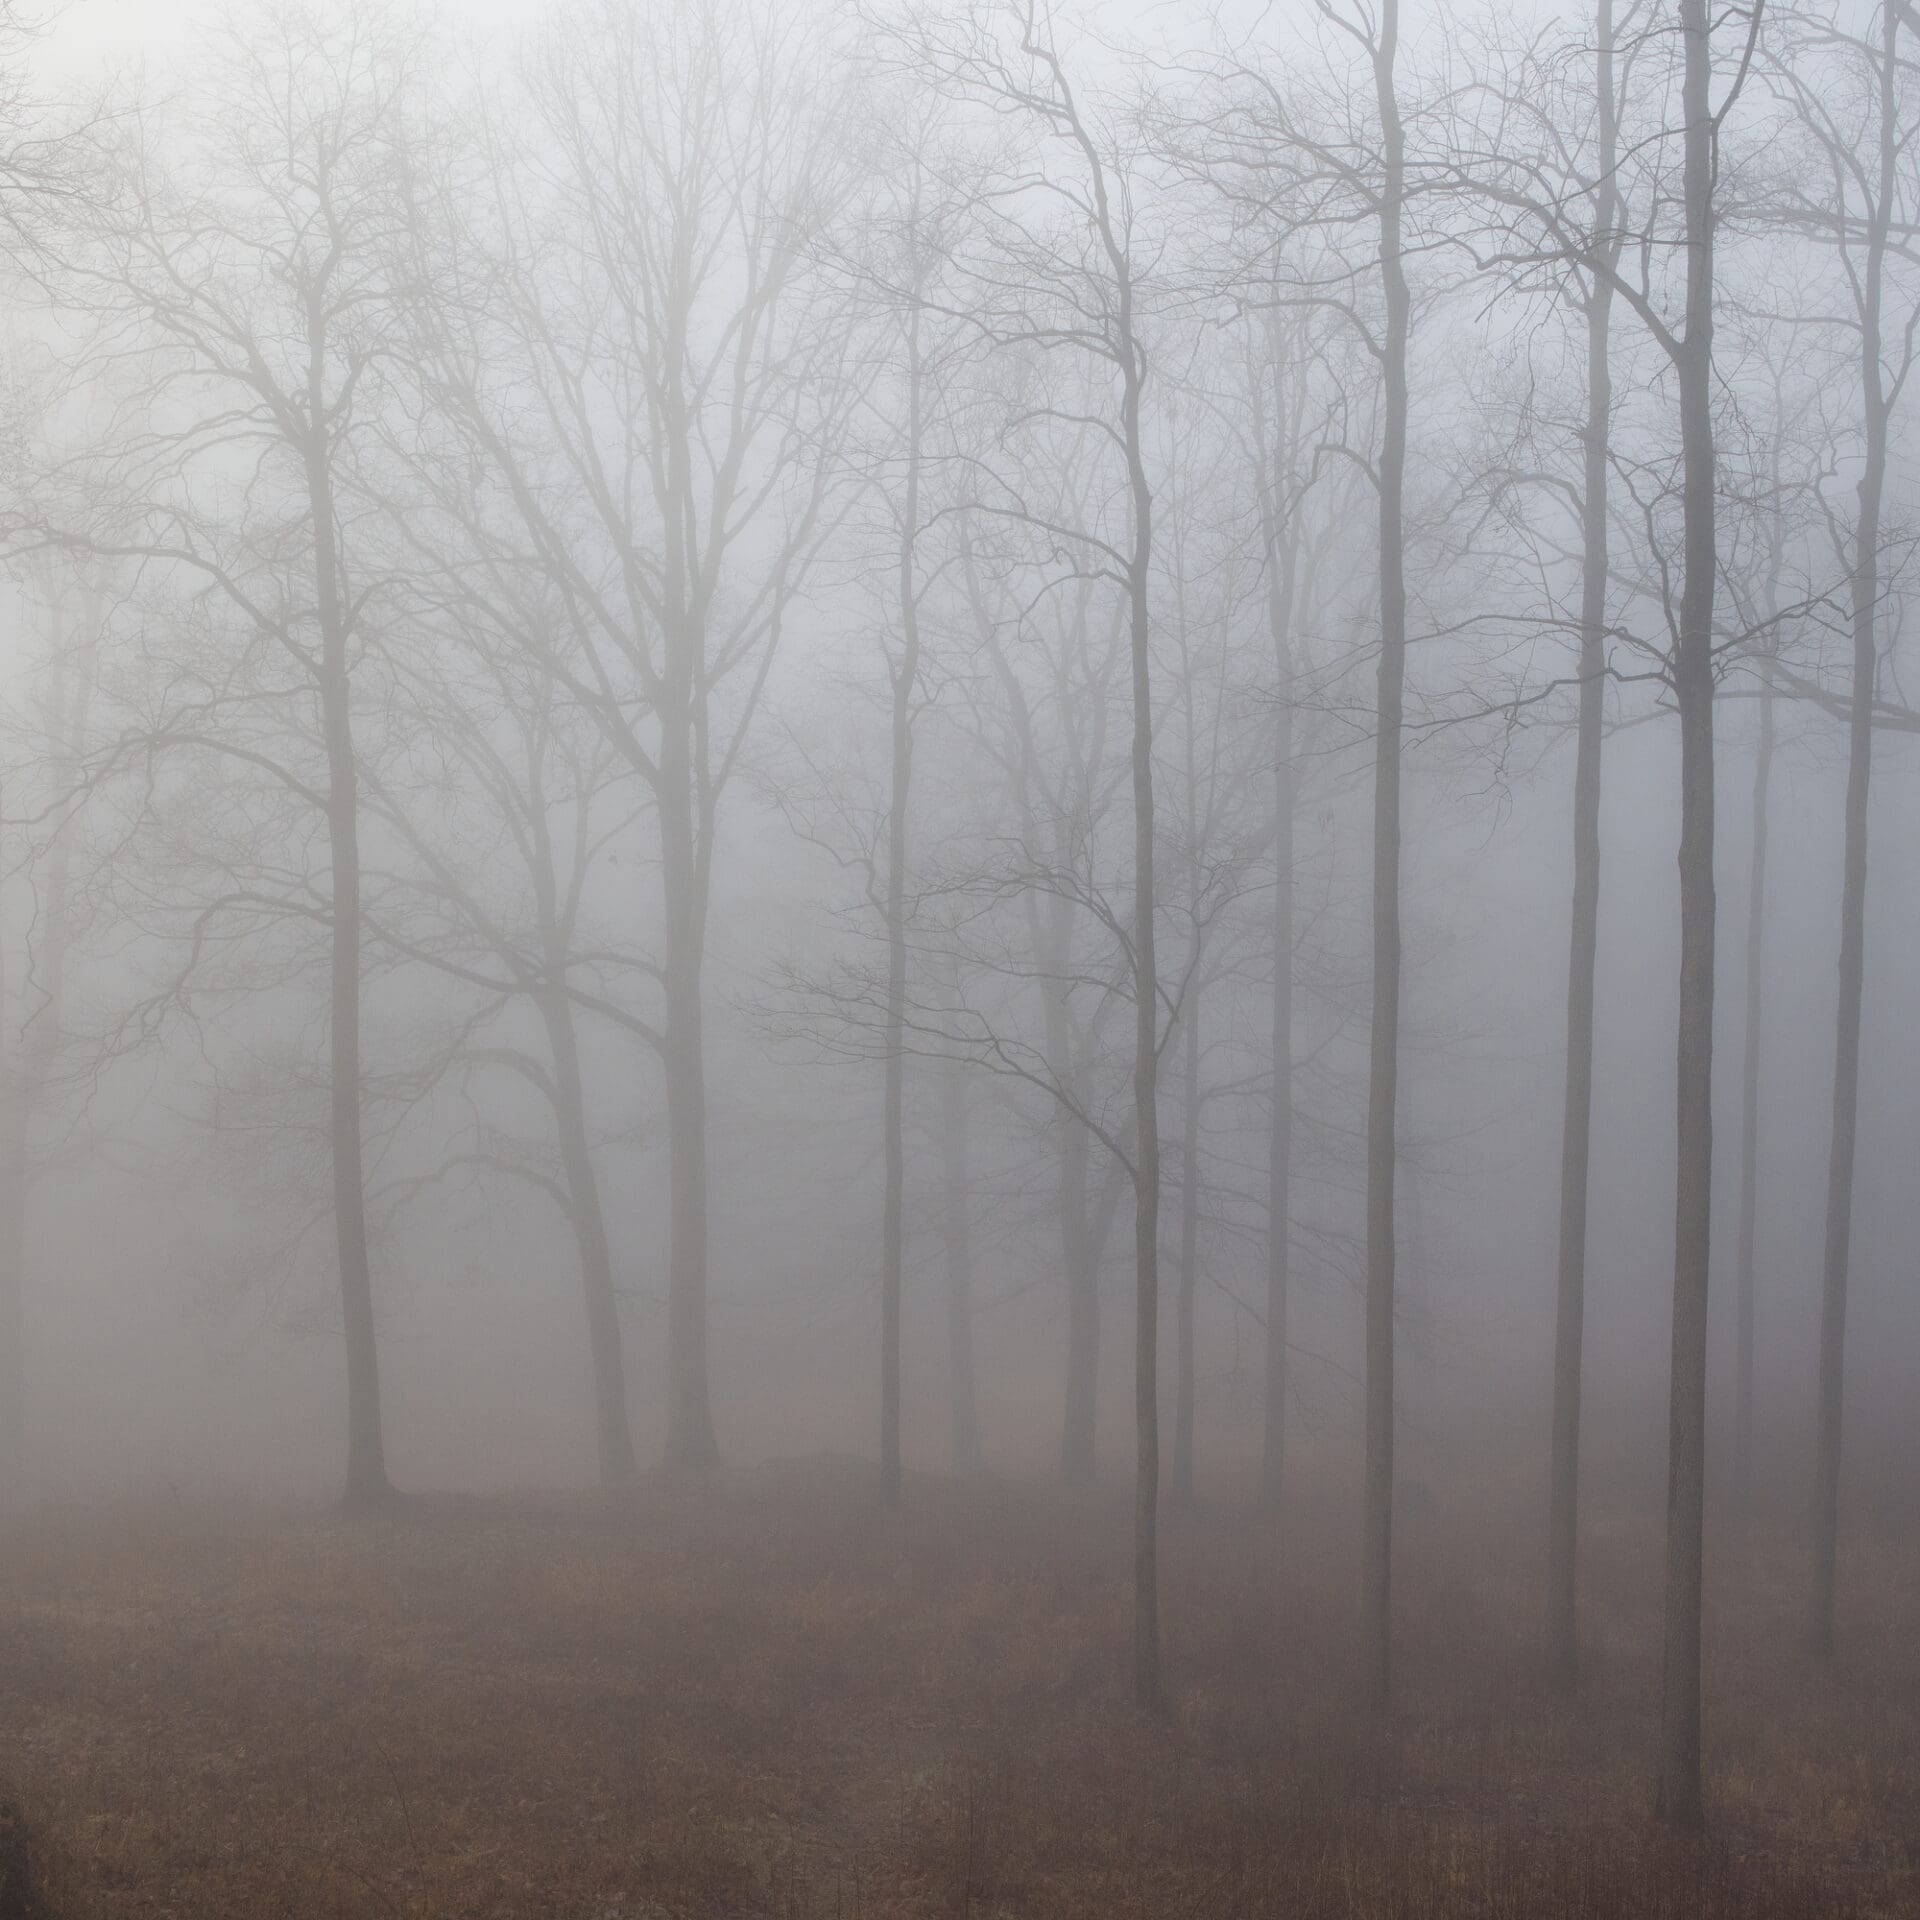 Photographer Rich-Joseph Facun | Some tall, skinny trees cast silhouettes in a grey mist